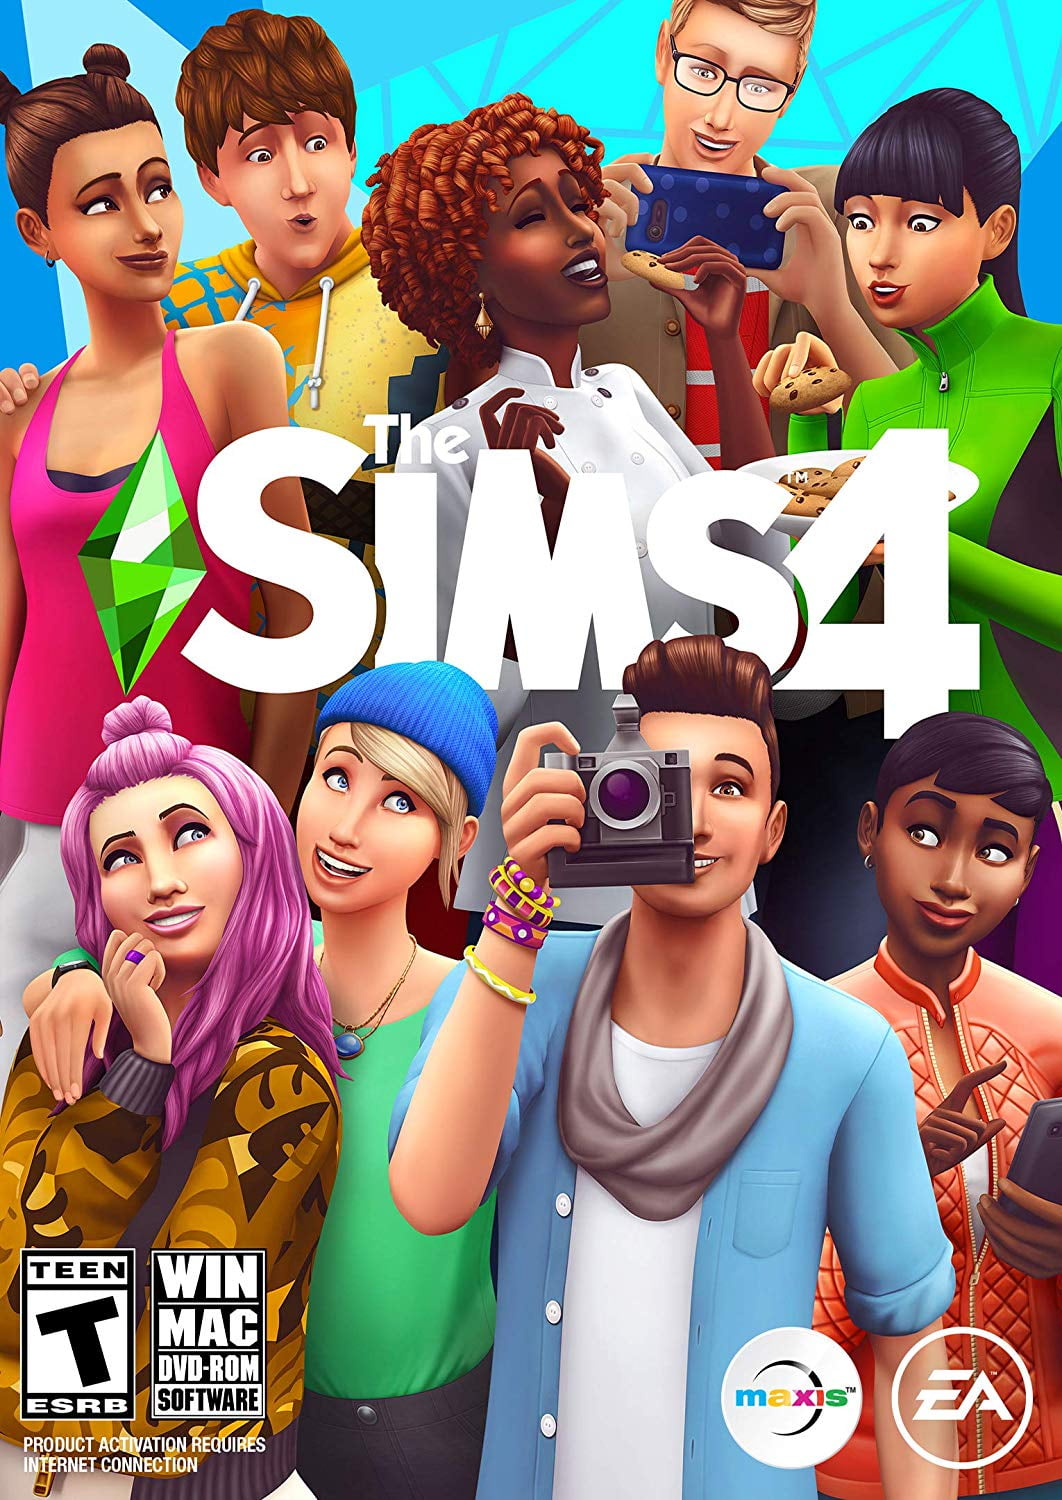 sims download